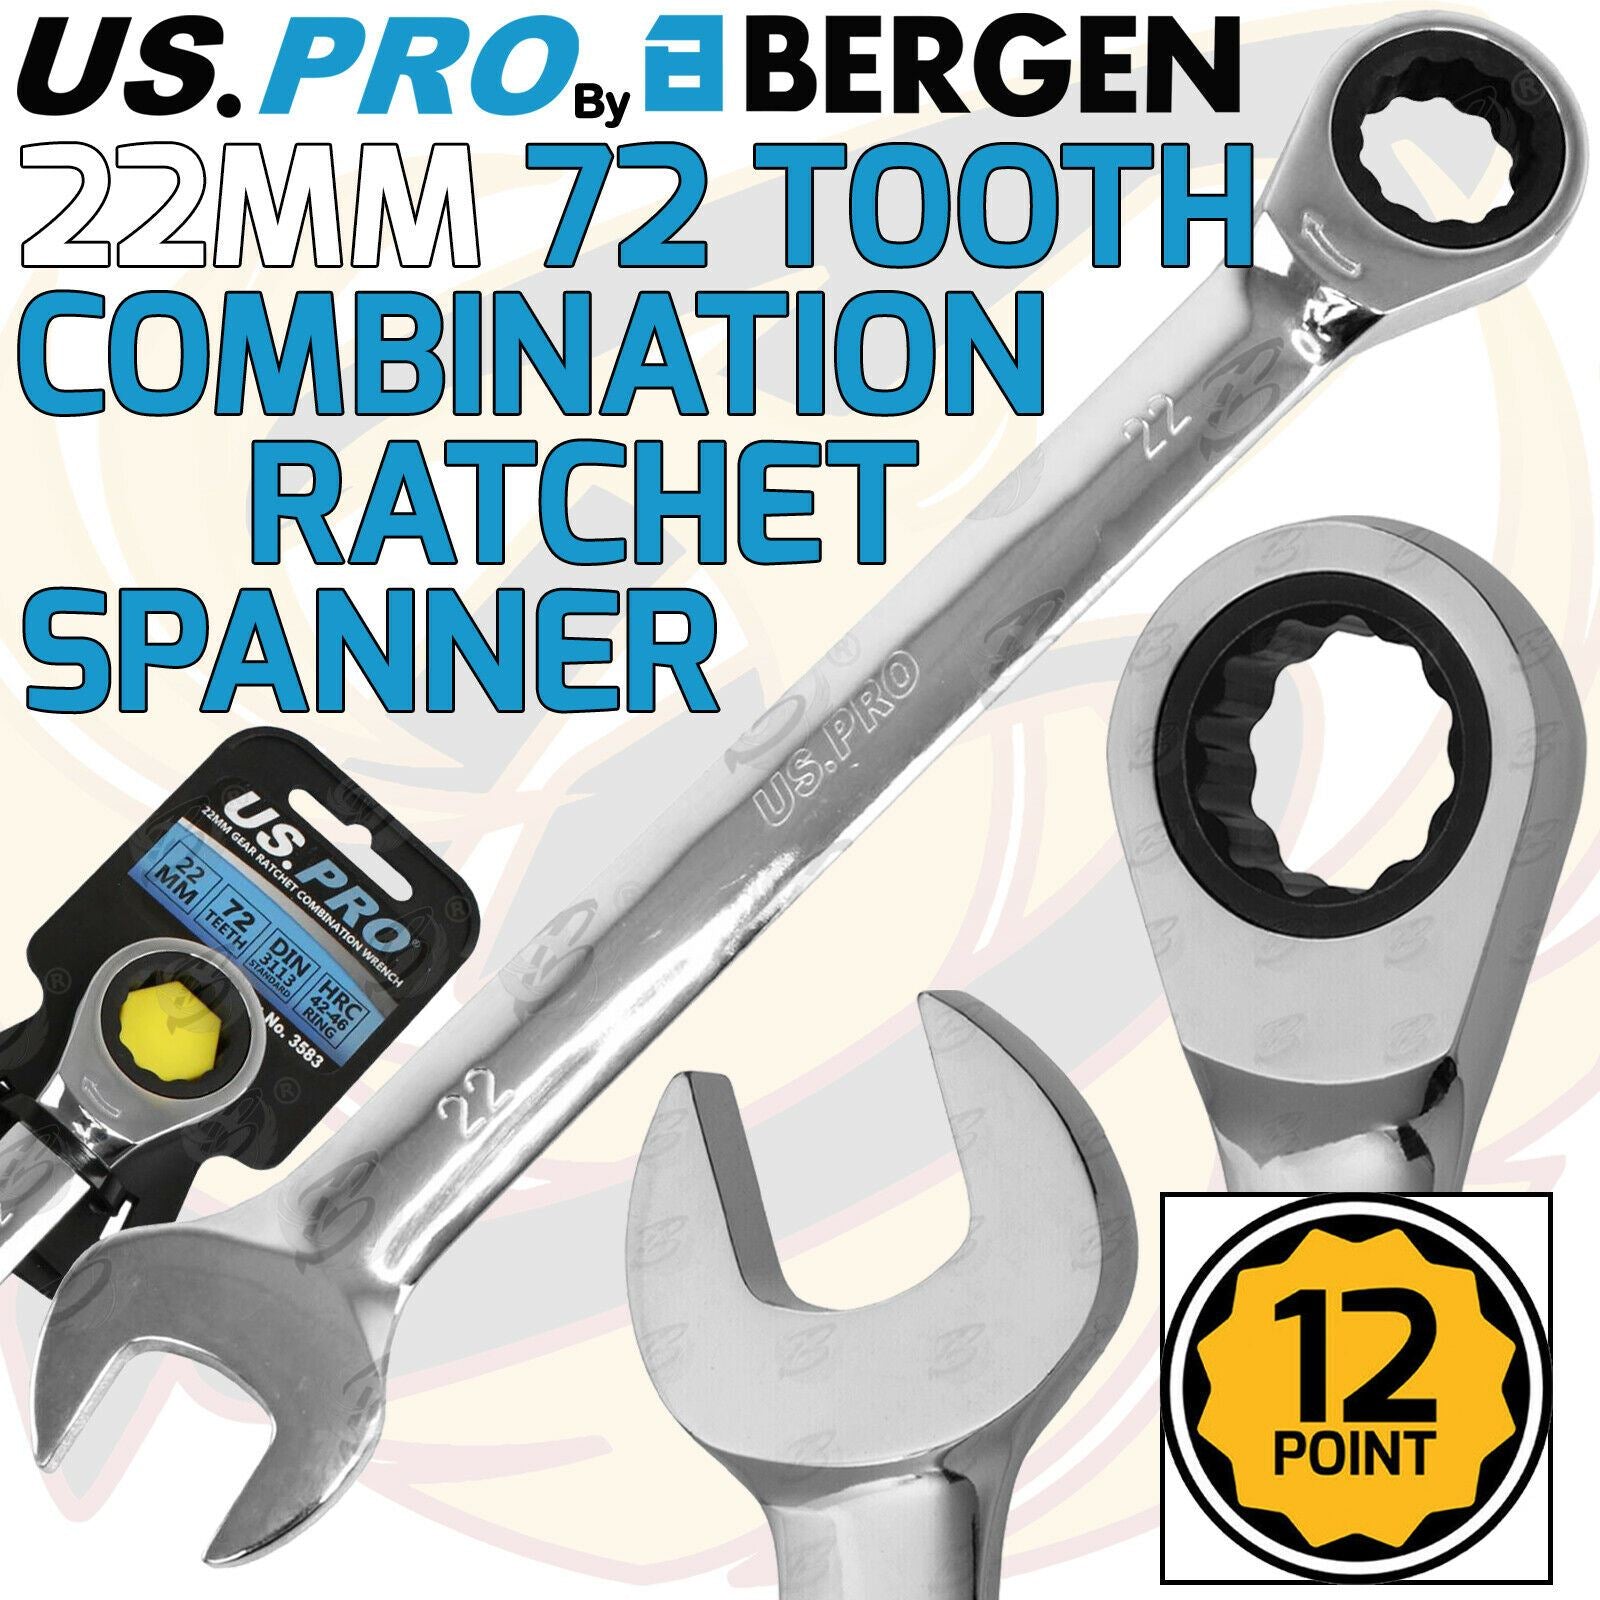 US PRO 22MM 72 TOOTH RATCHET SPANNER